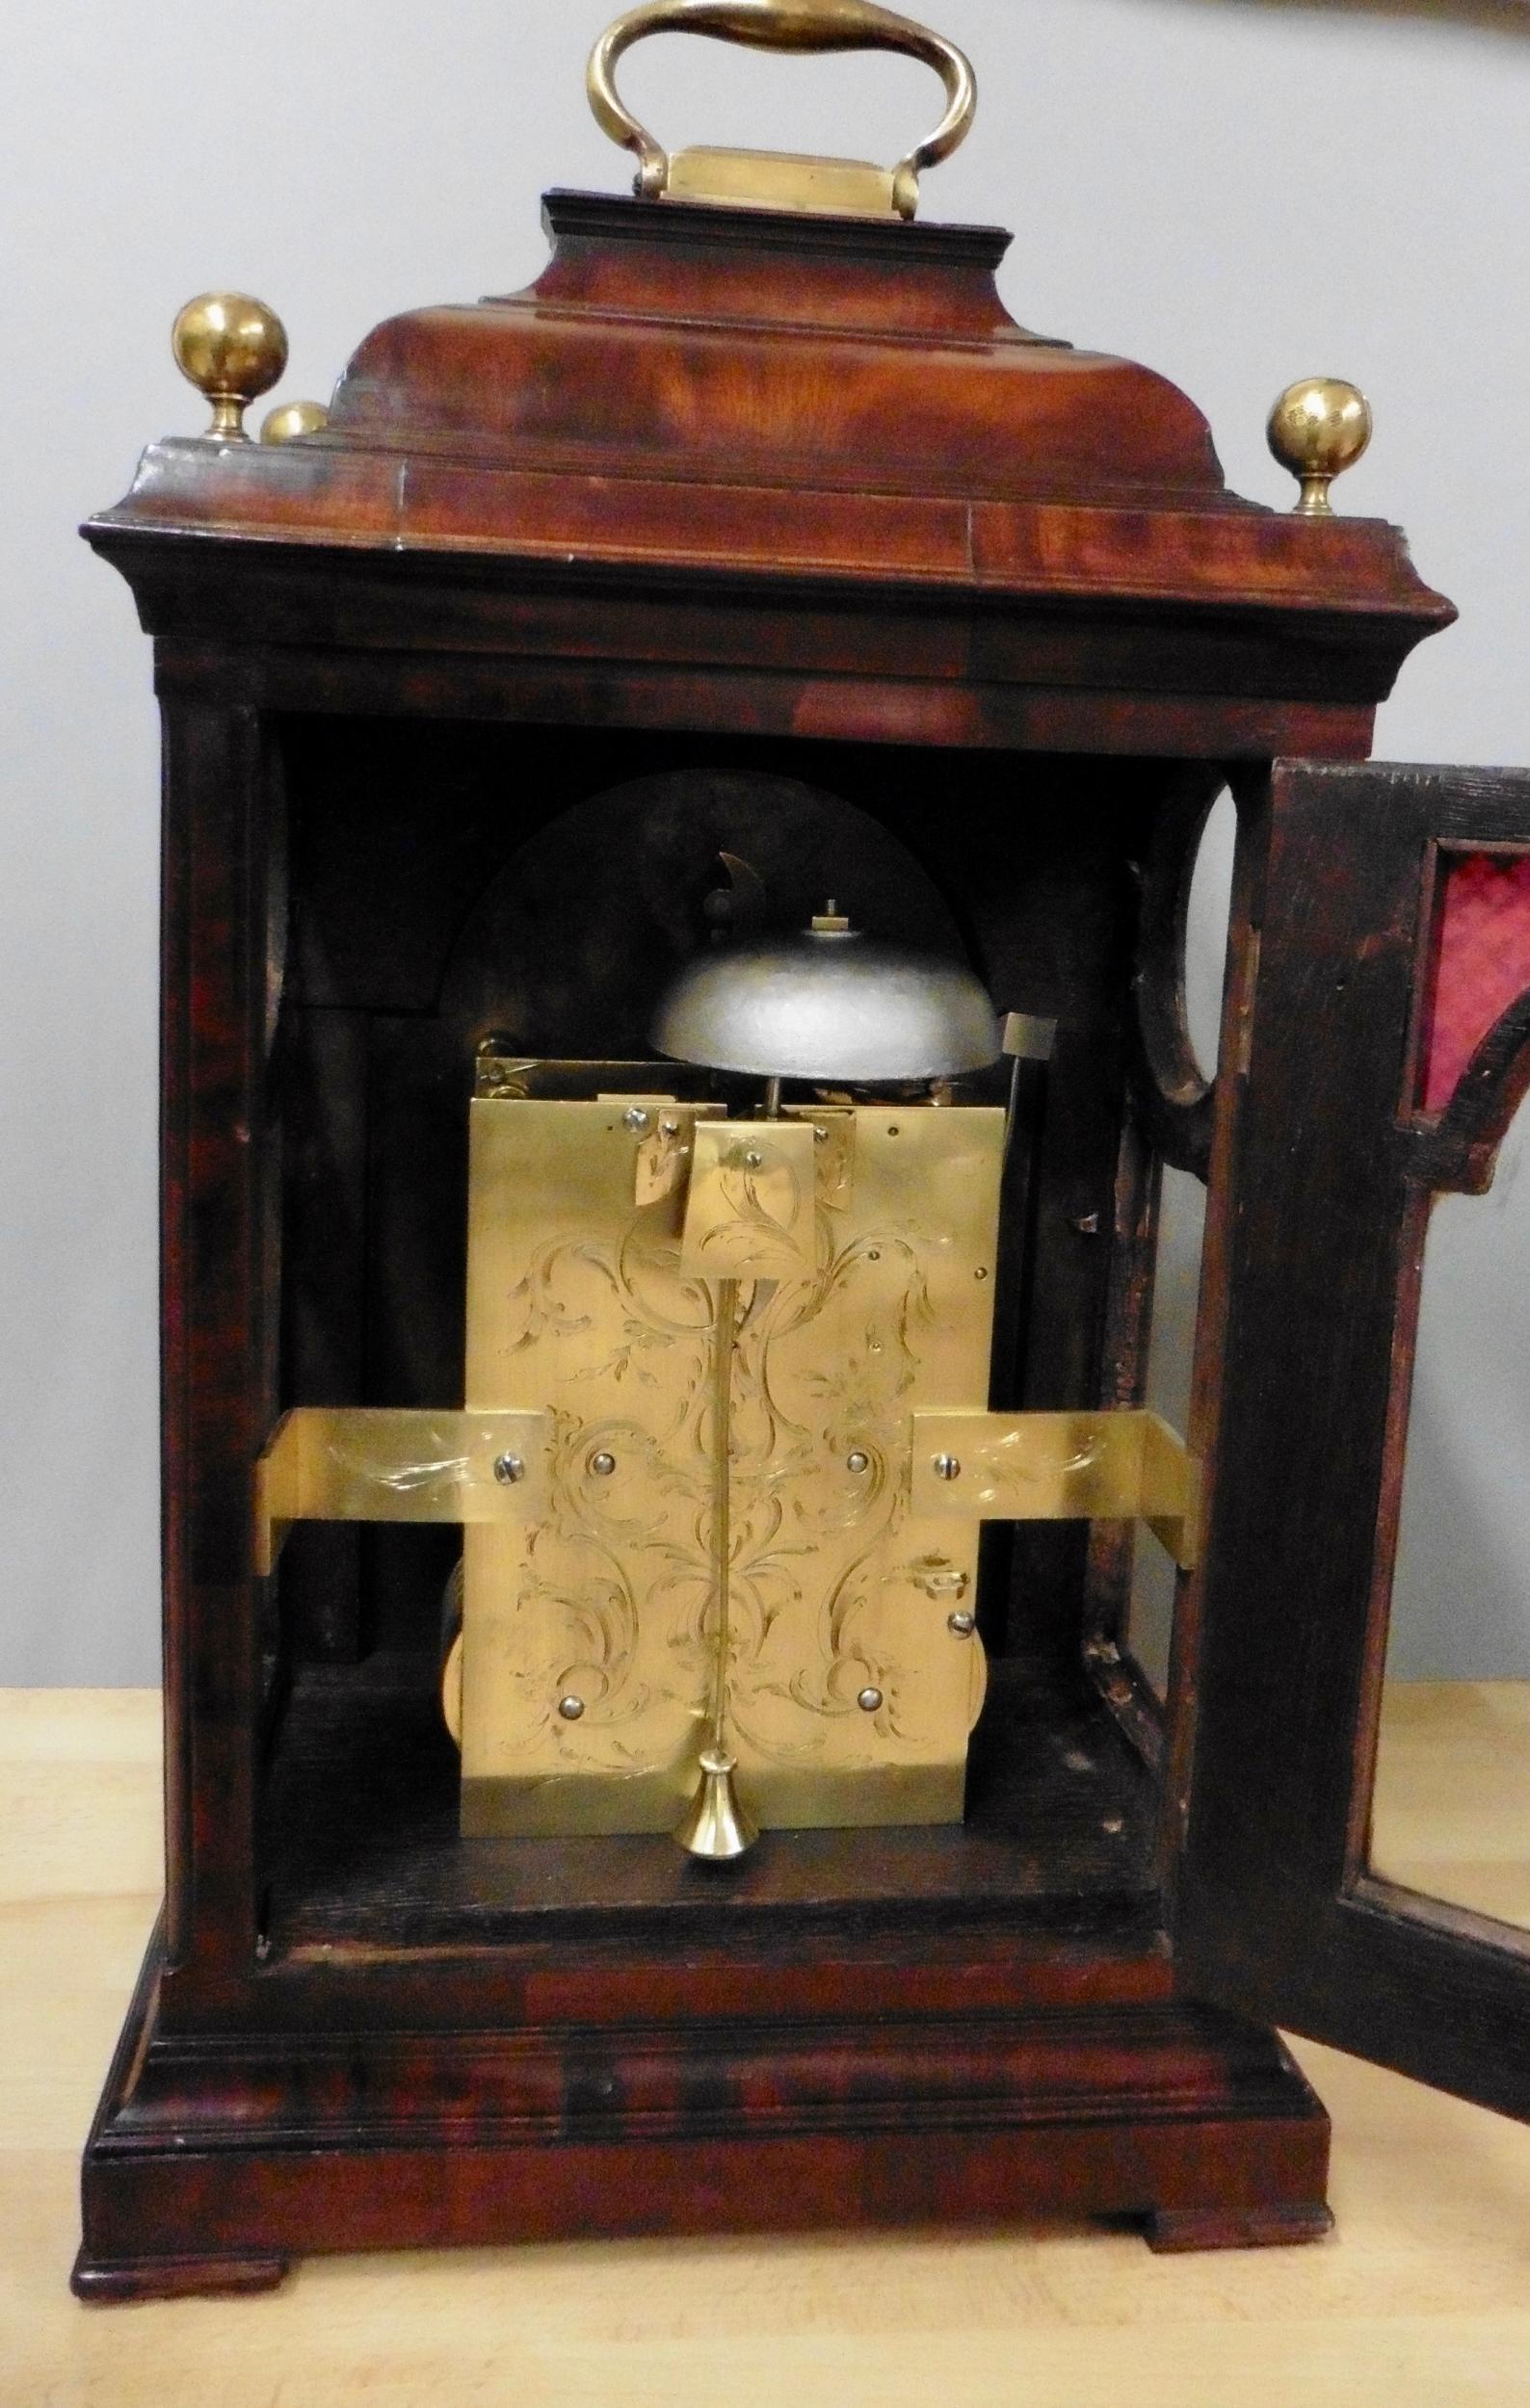 George III Mahogany Bell Top Bracket Clock With Verge Escapement by H.Thomas For Sale 1